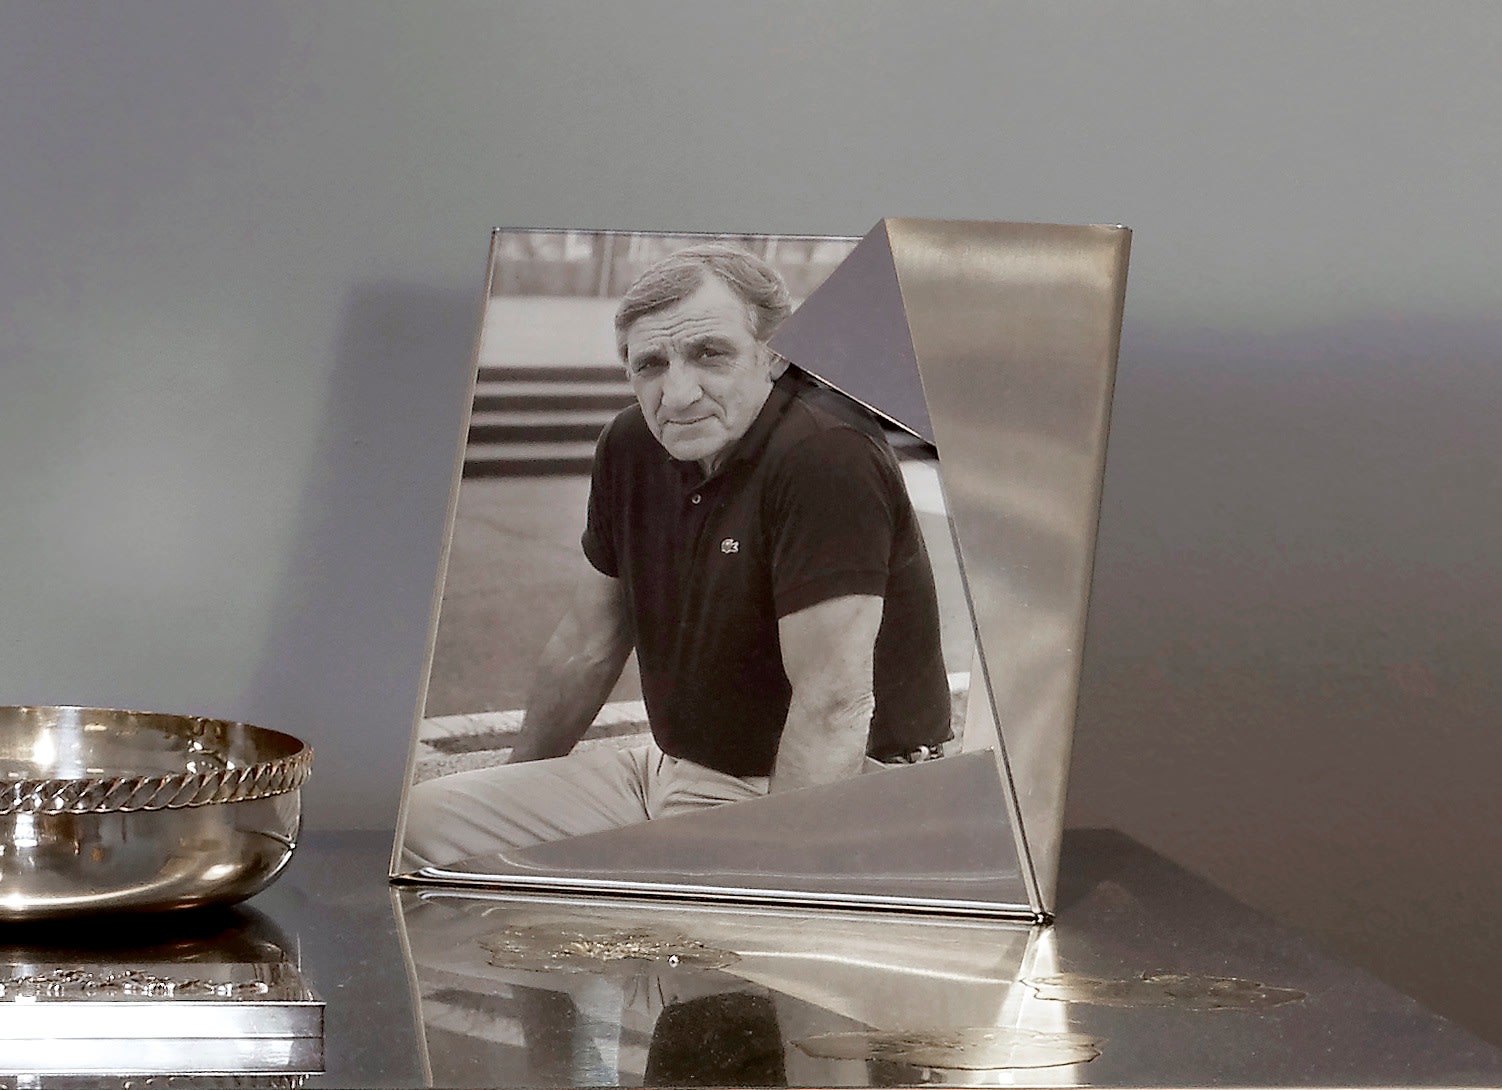 Photograph of Lino Ventura in the Frame